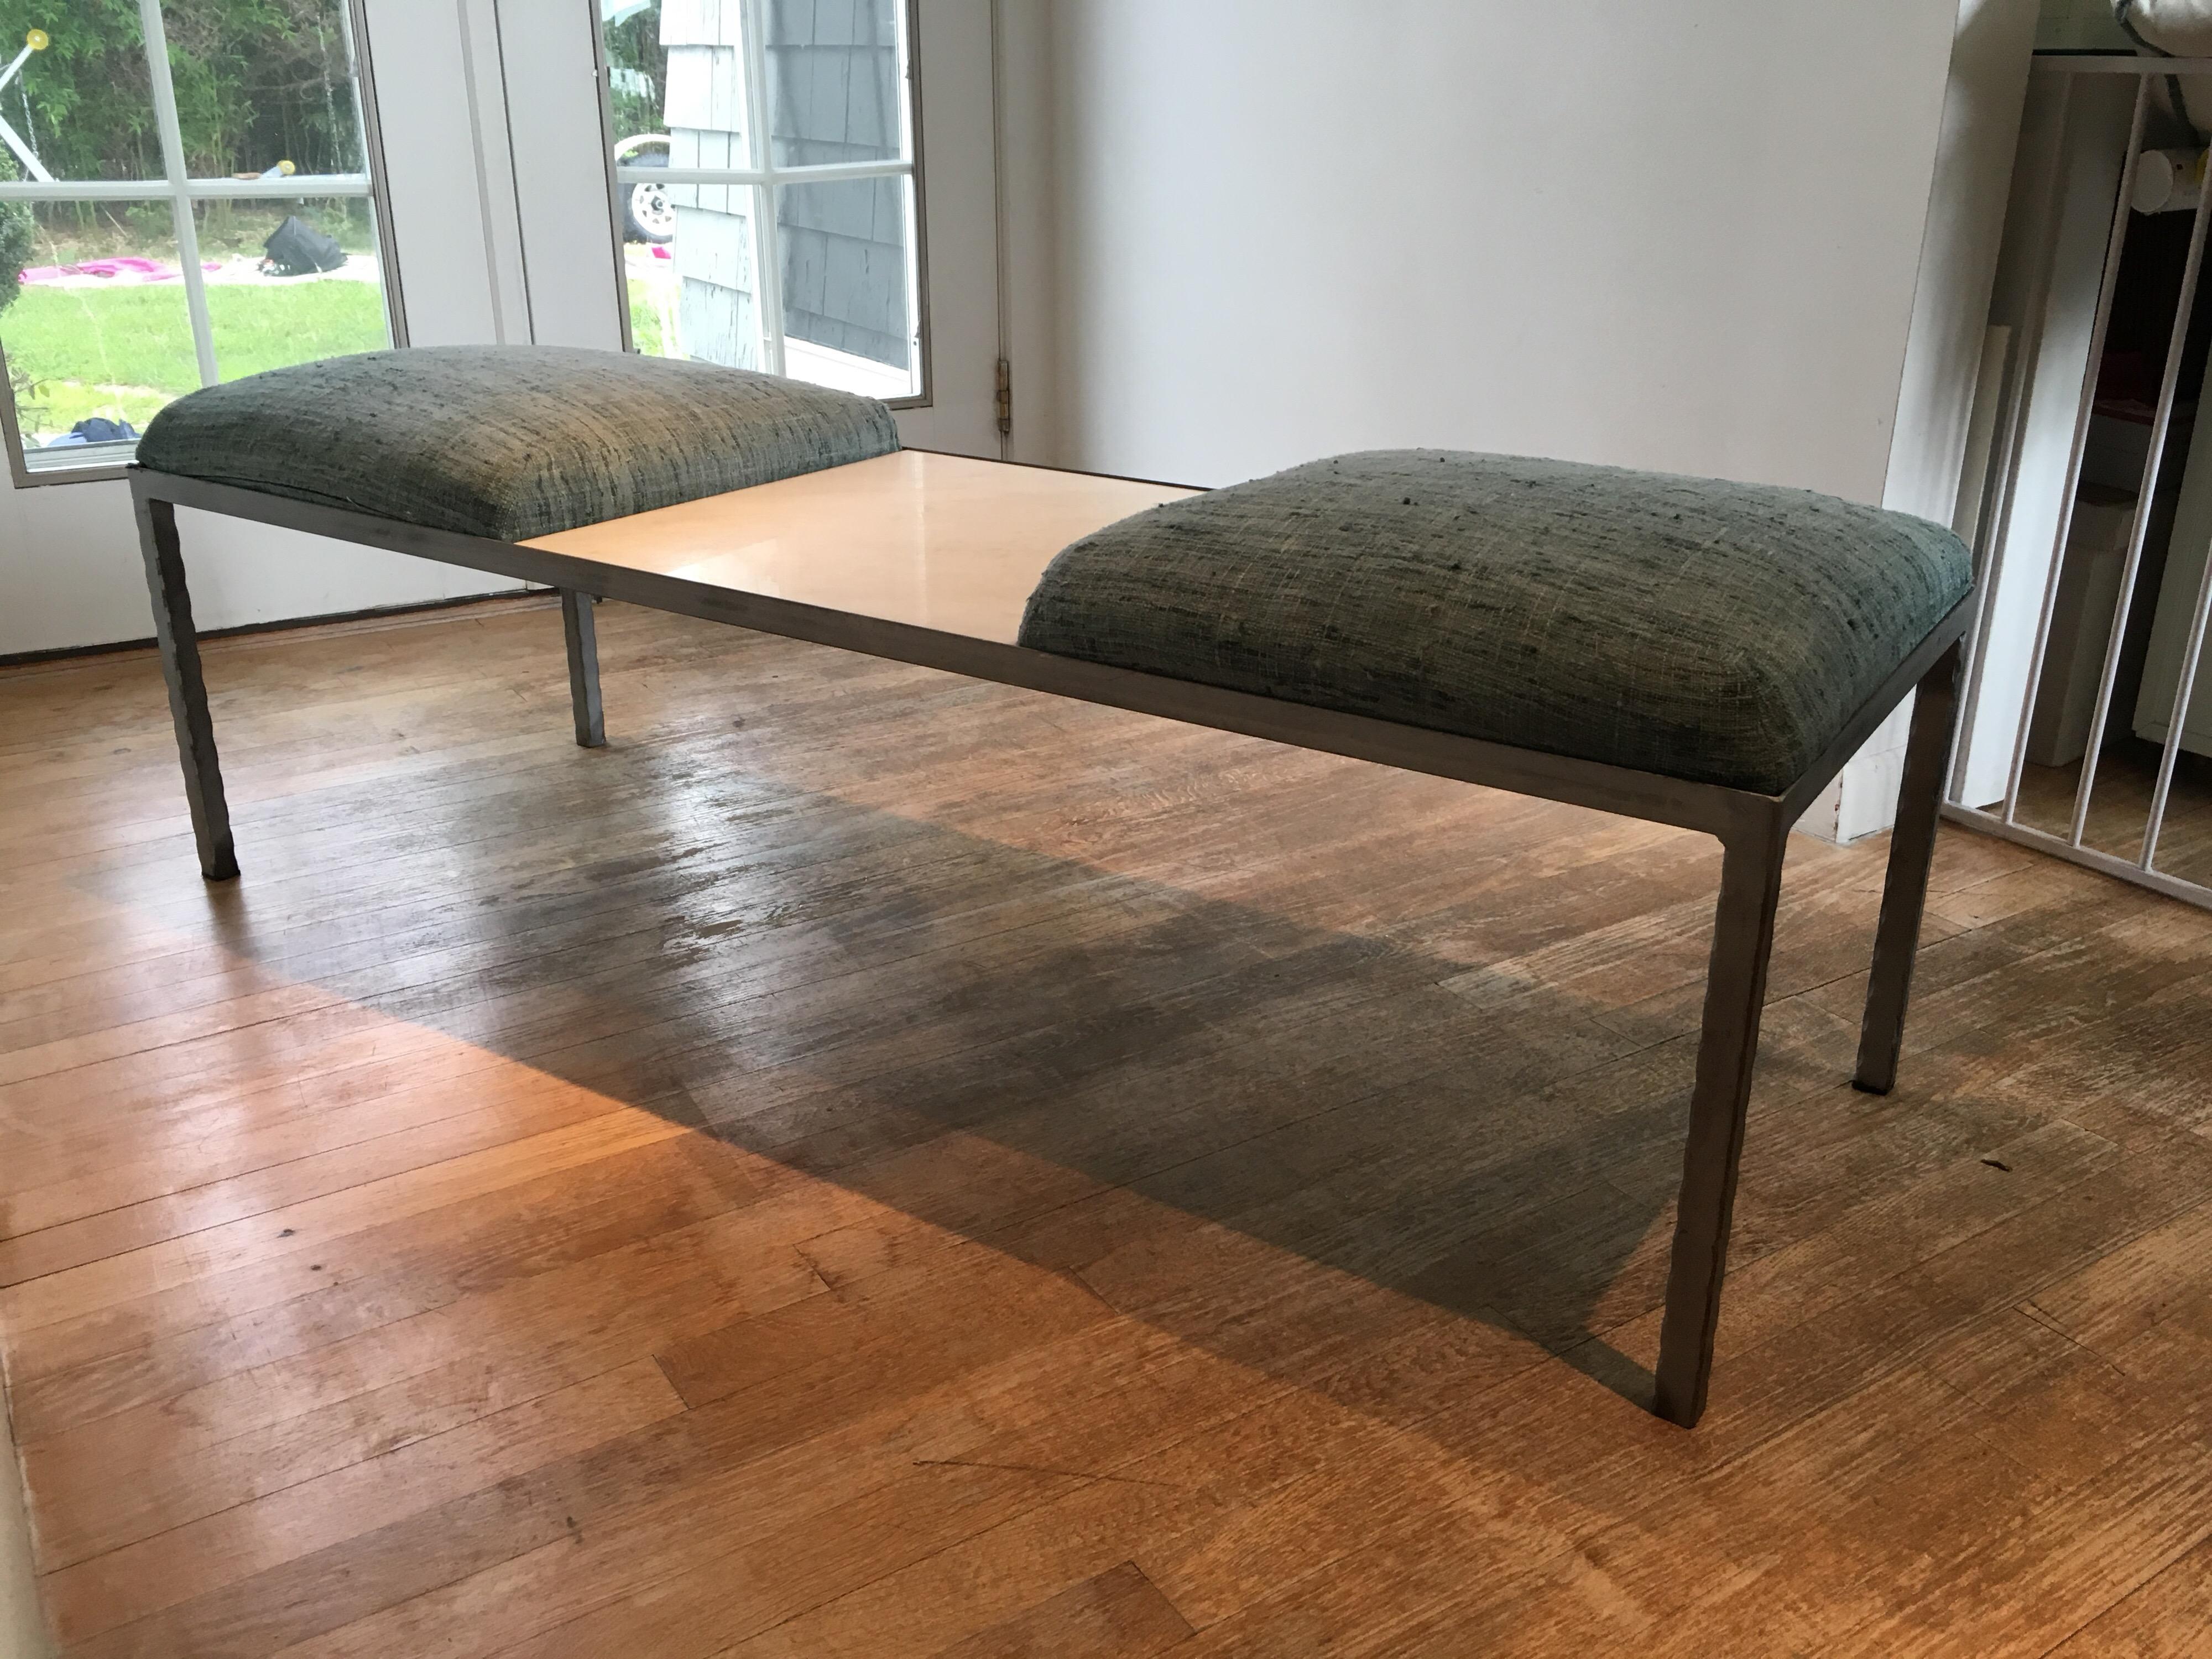 21st Century Modular Iron Bench with Marble Table by Susie Shapiro Design In Excellent Condition For Sale In Southampton, NY